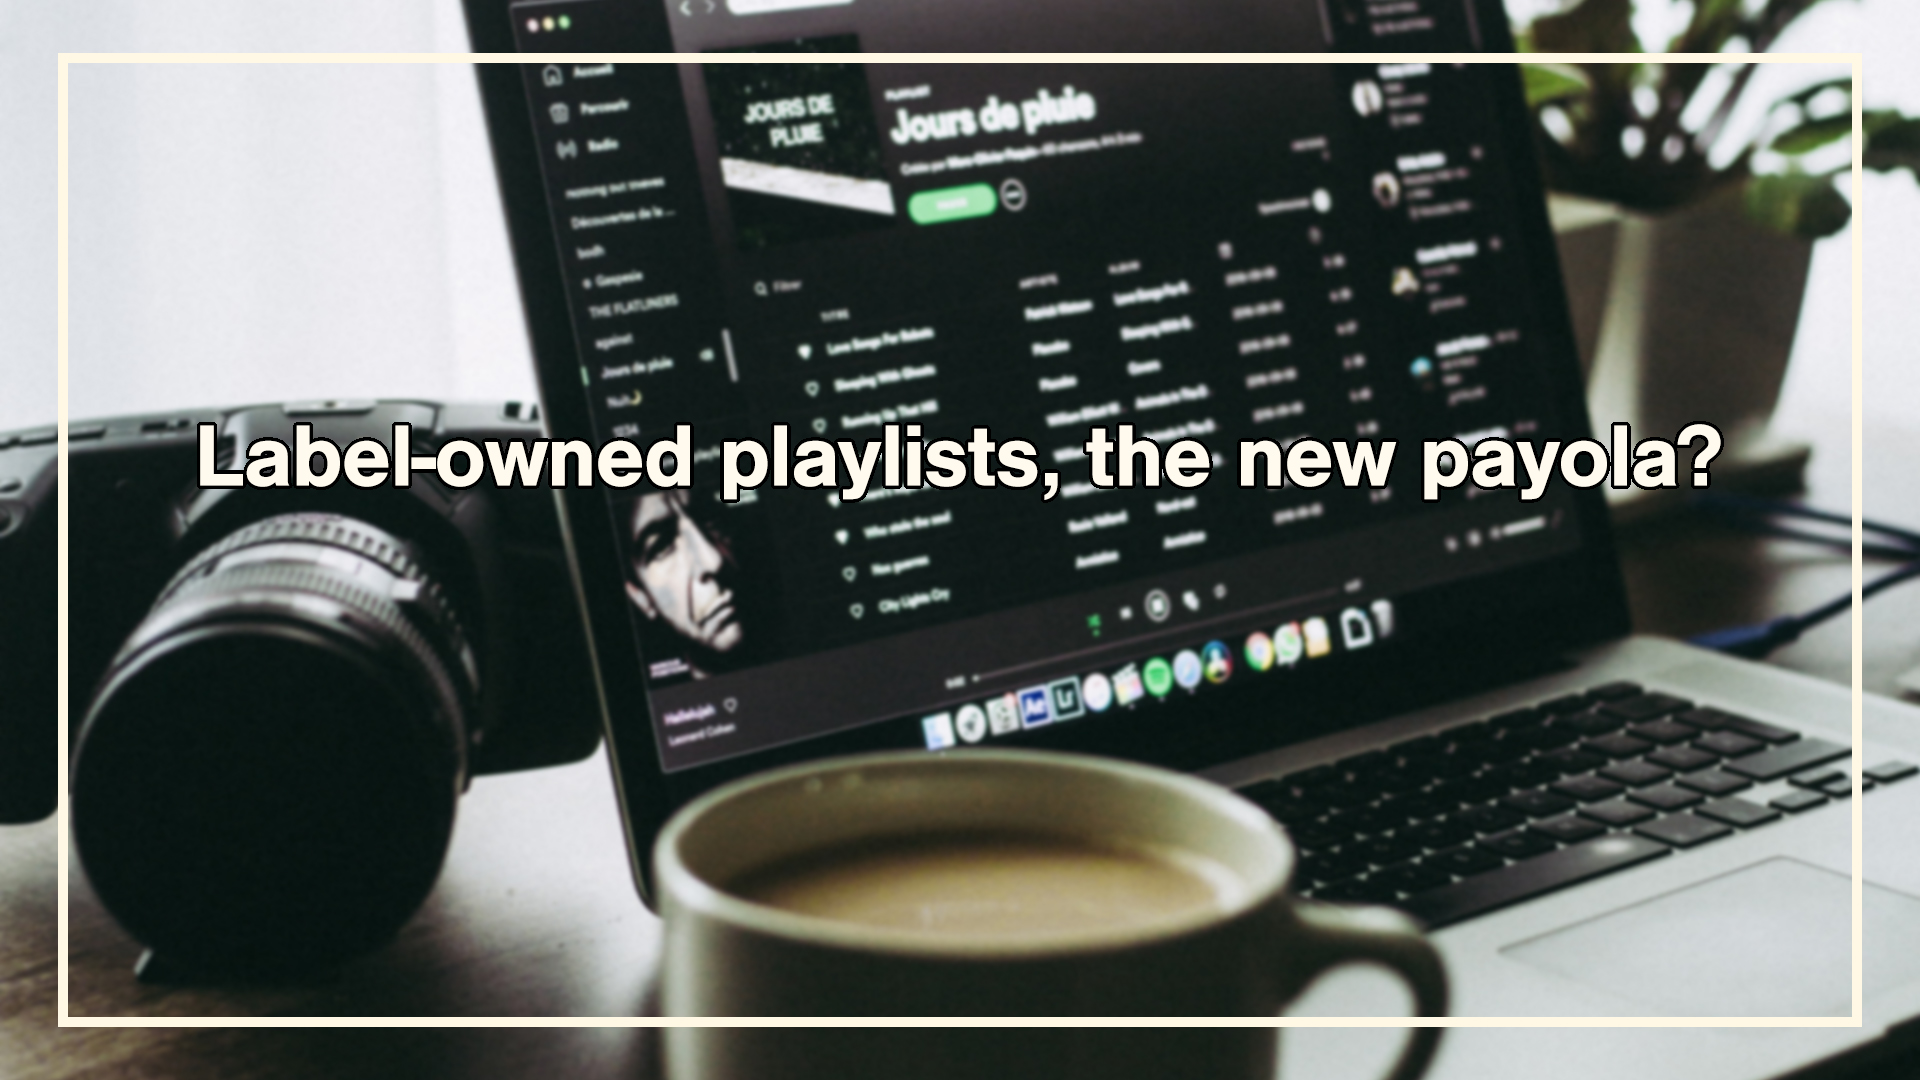 Label-owned playlists, are they the new payola?